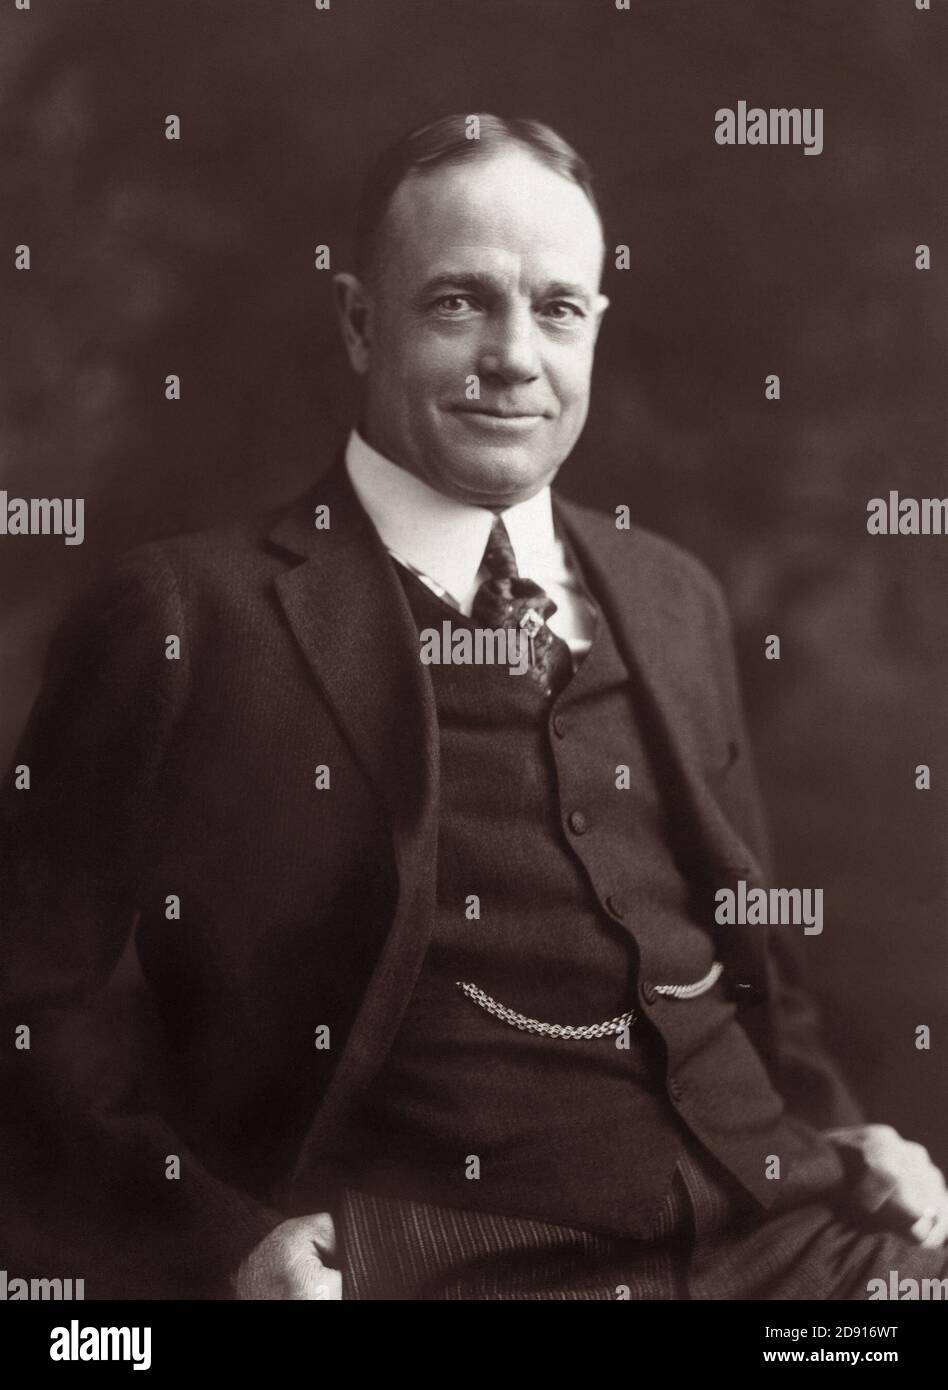 Popular American evangelist William “Billy” Sunday (1862-1935), former outfielder in baseball's National League during the 1880s, in a portrait by G. Arthur Fairbanks, c1915. (USA) Stock Photo